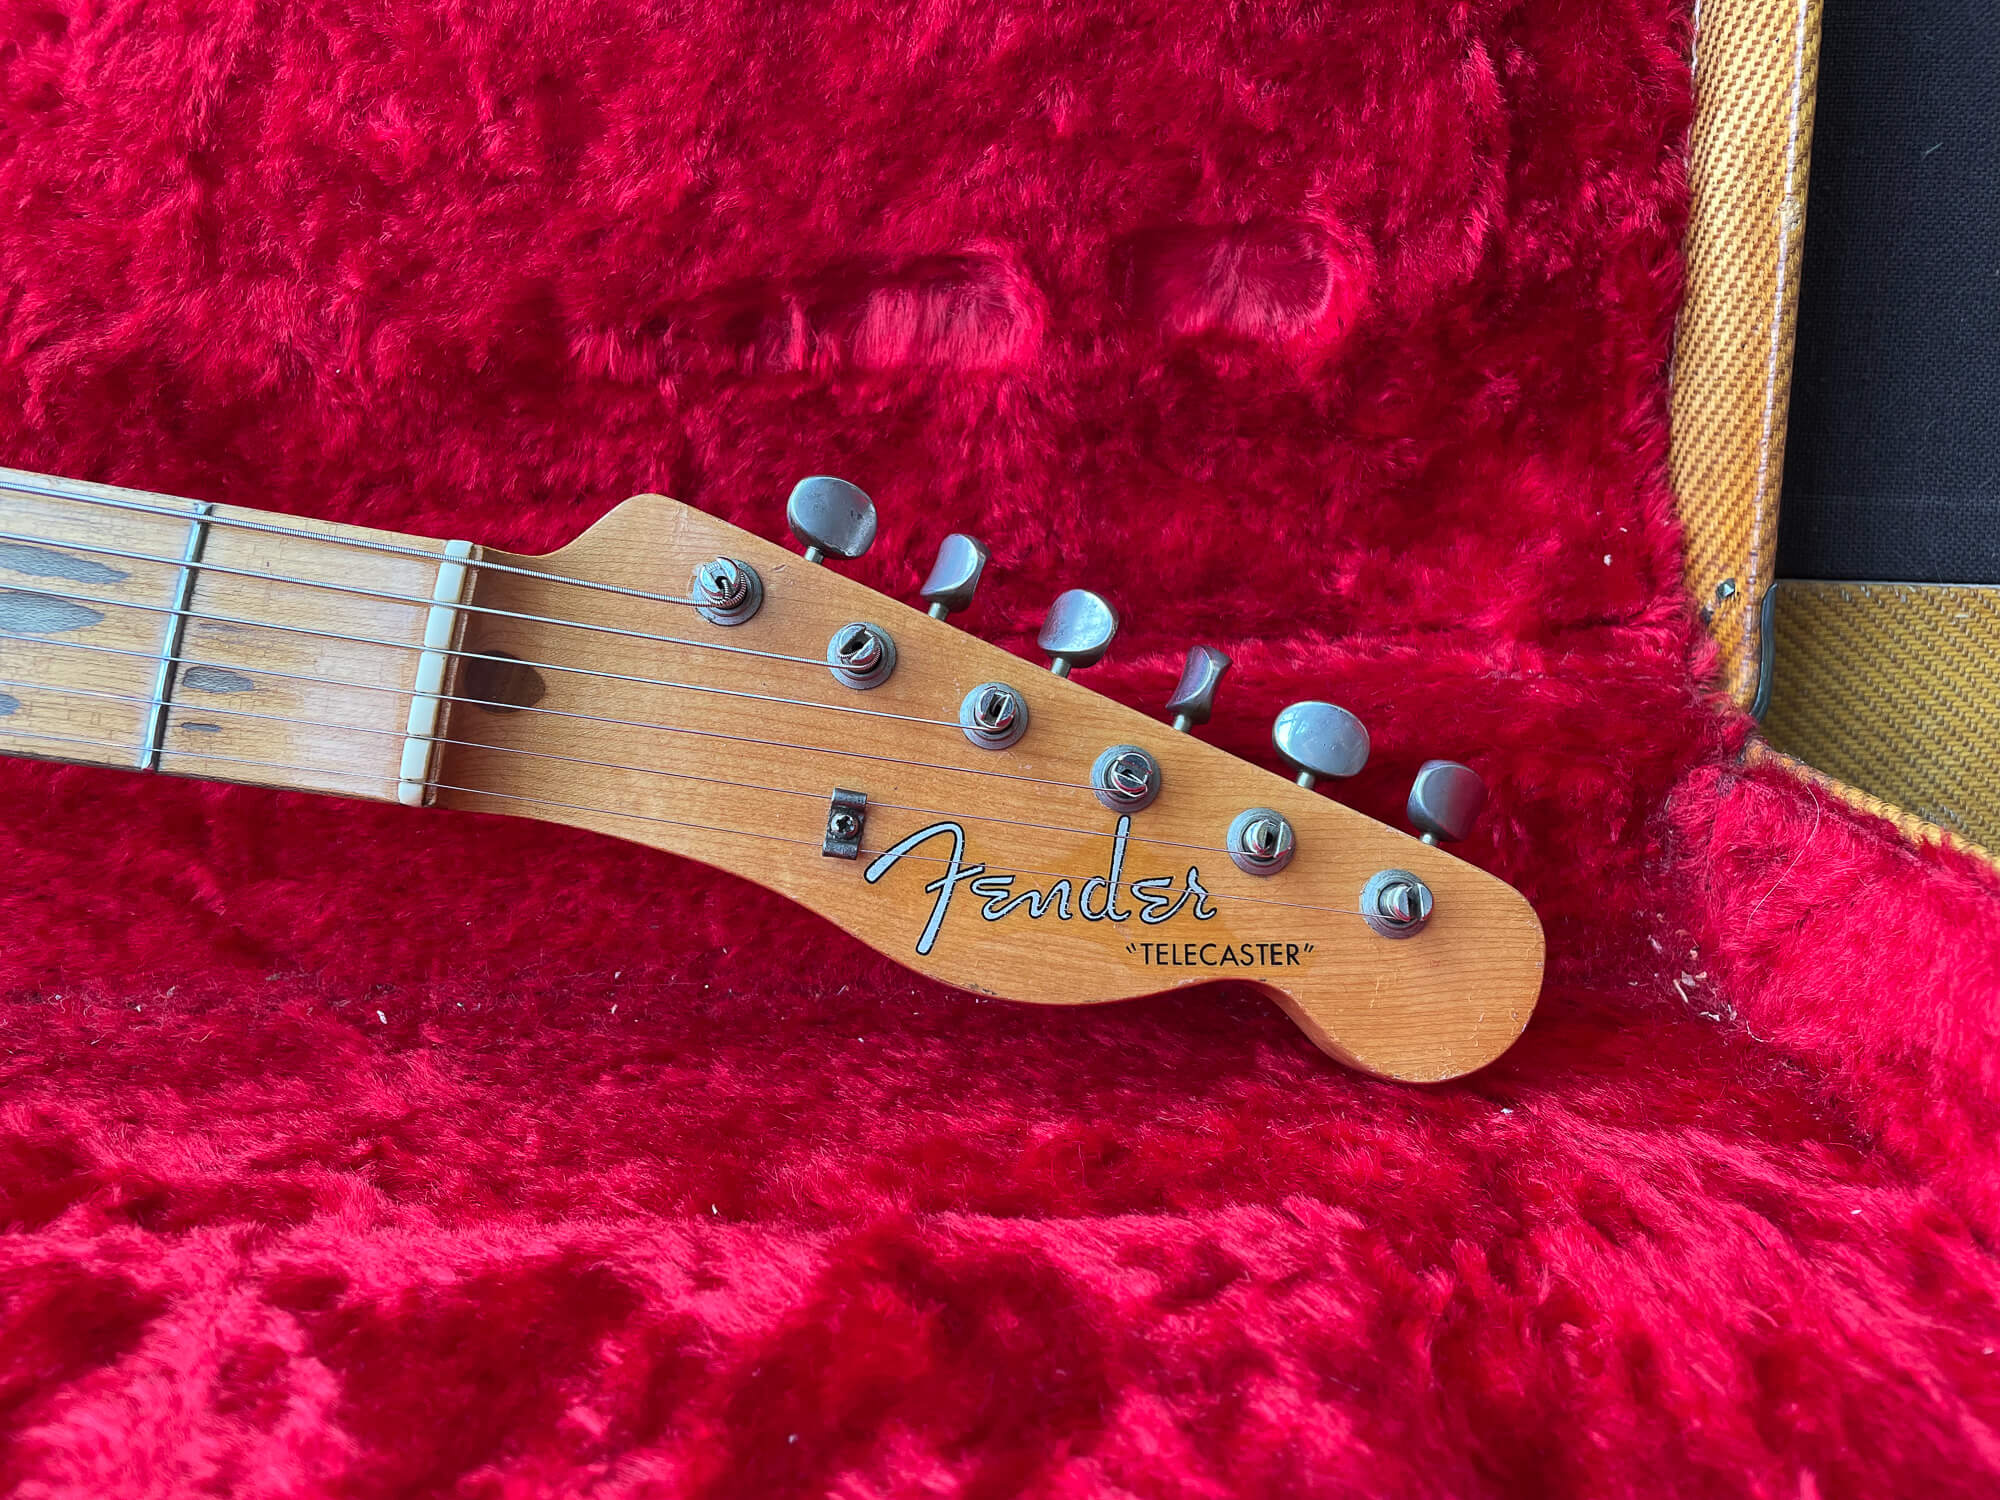 1958 Fender Telecaster dating and year of manufacture